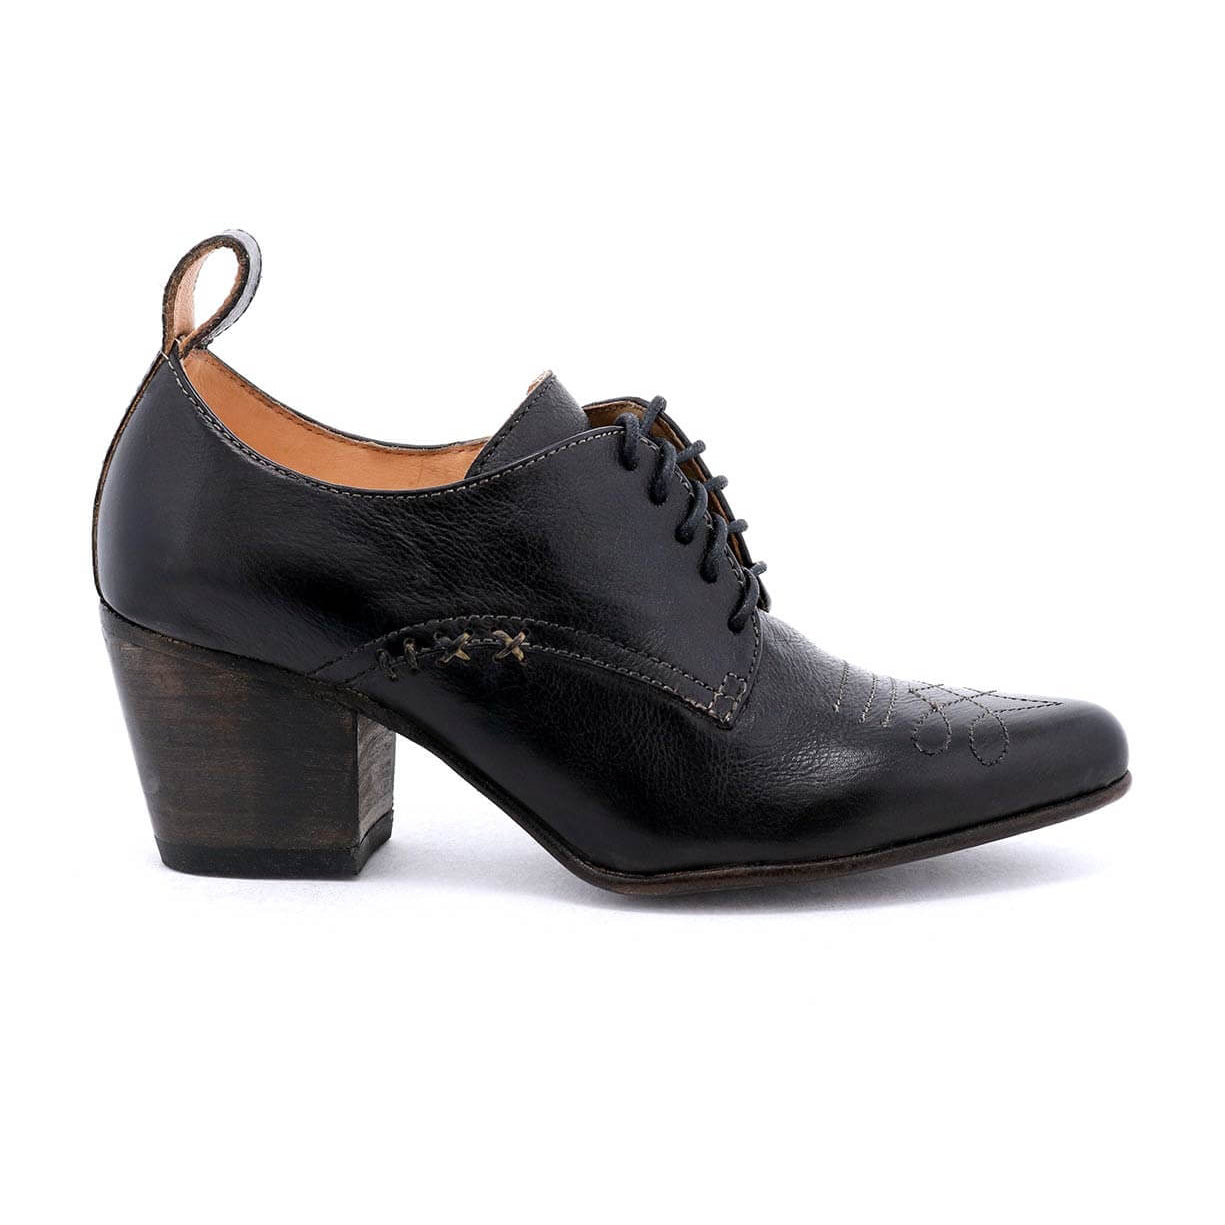 A Victorian inspired women's Braunstone black leather oxford shoe with wooden heel from Oak Tree Farms.